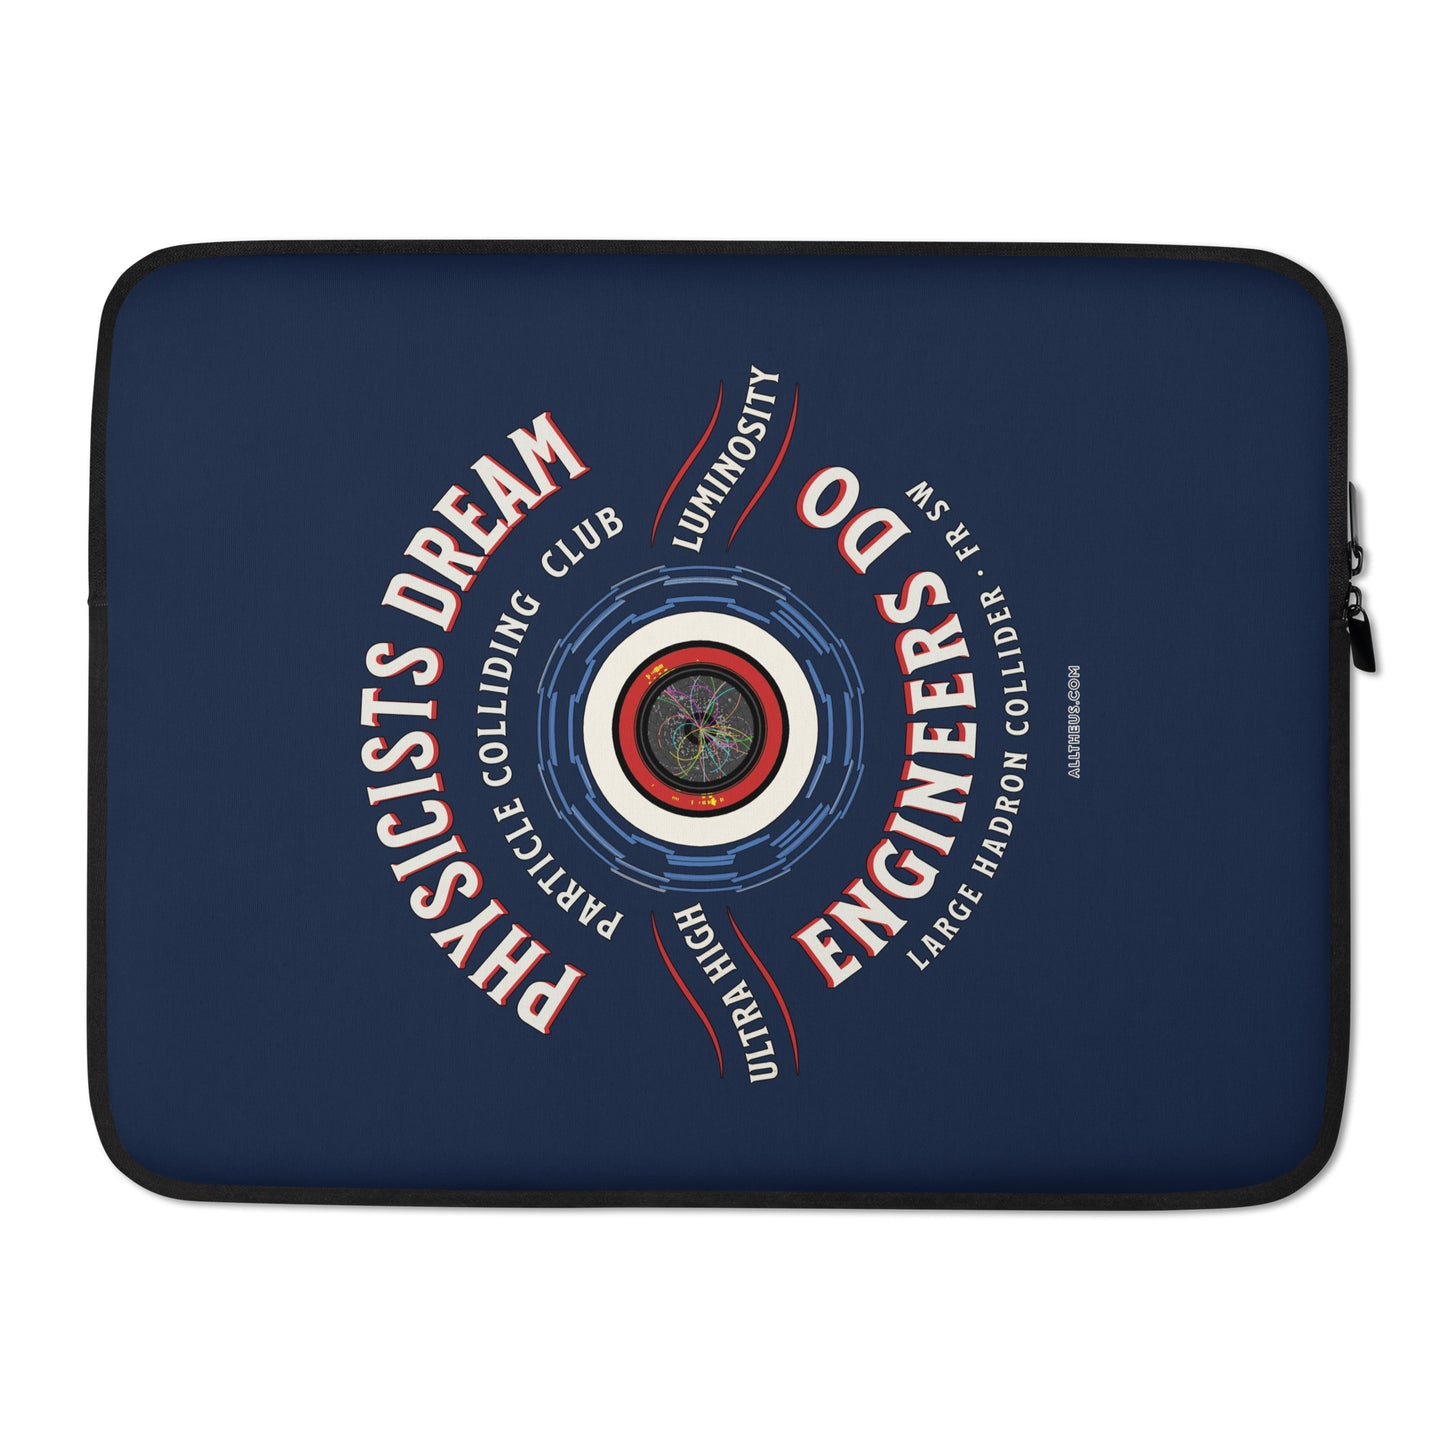 Laptop Sleeve - LHC Engineers Outnumber The Physicists